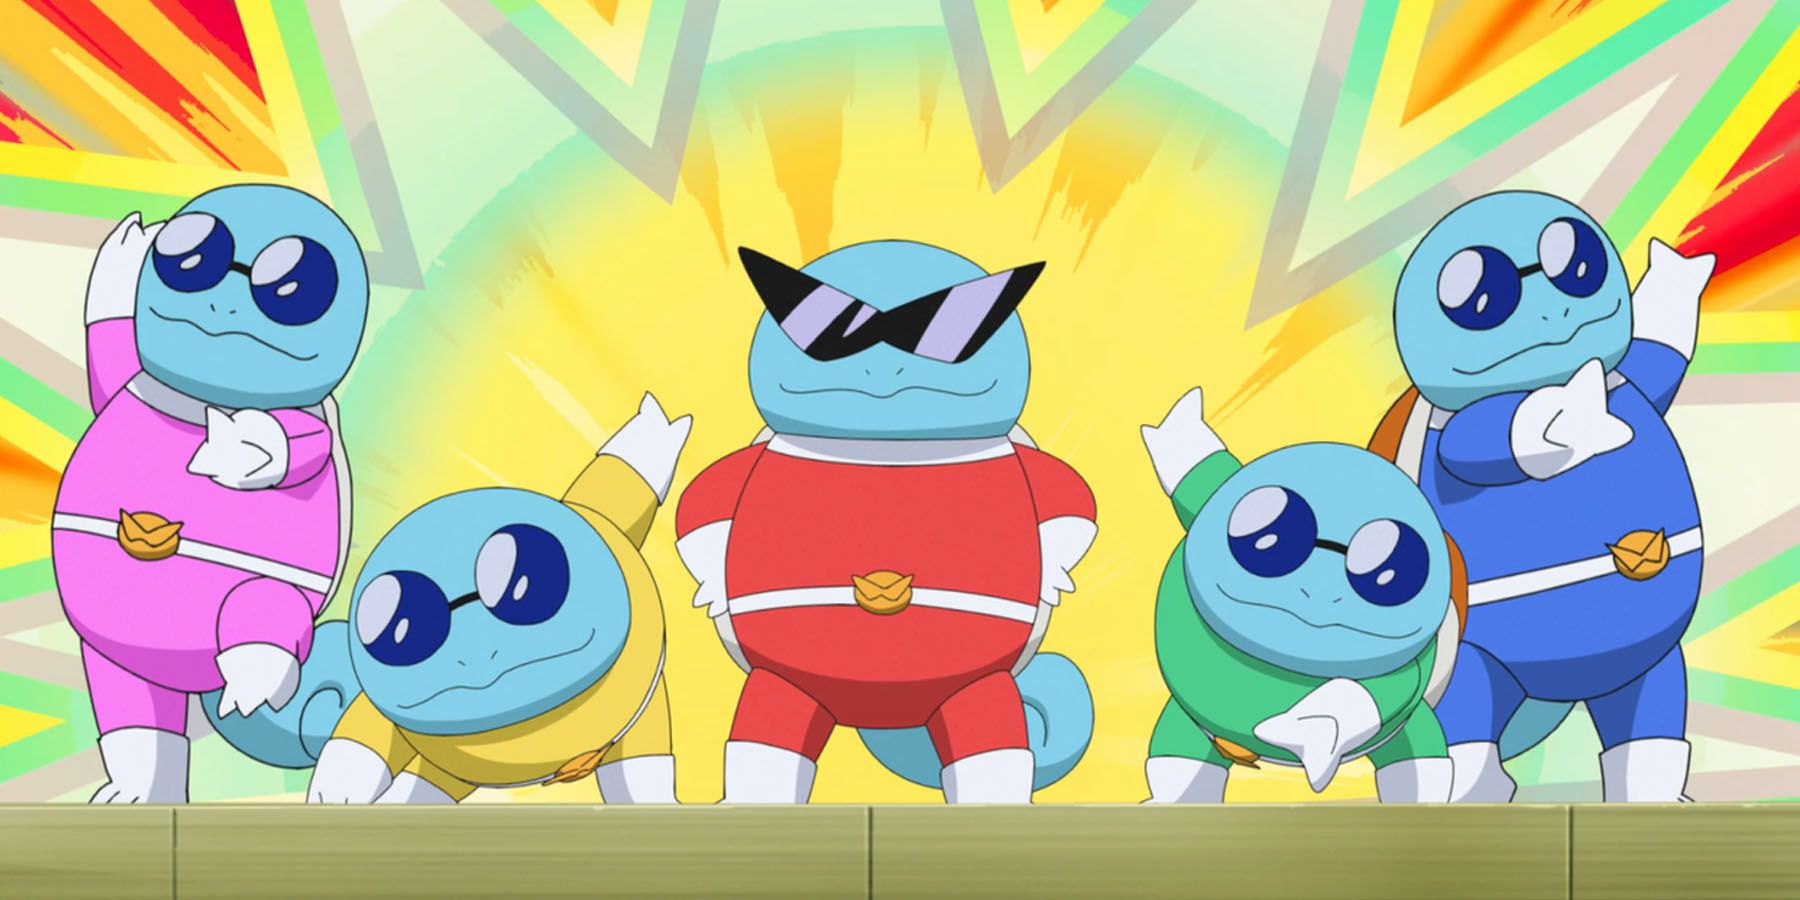 A screenshot of the Squirtle Squad wearing colorful Power Rangers-inspired outfits in the Pokemon anime.